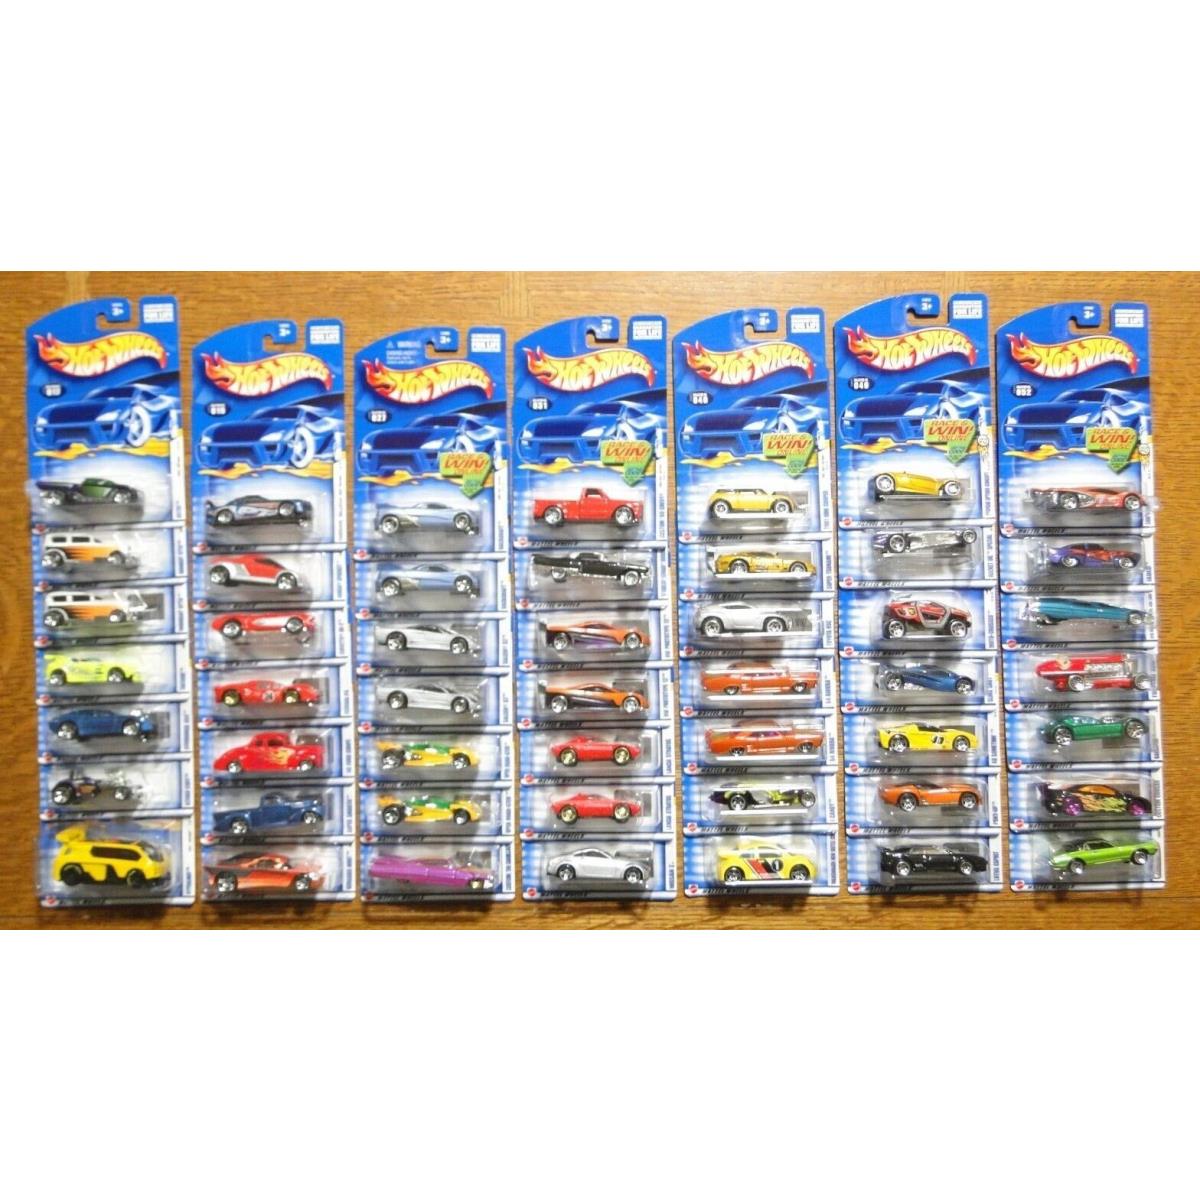 2002 First Editions Complete Set 1-42 Hot Wheels 1:64 on Cards - Nice